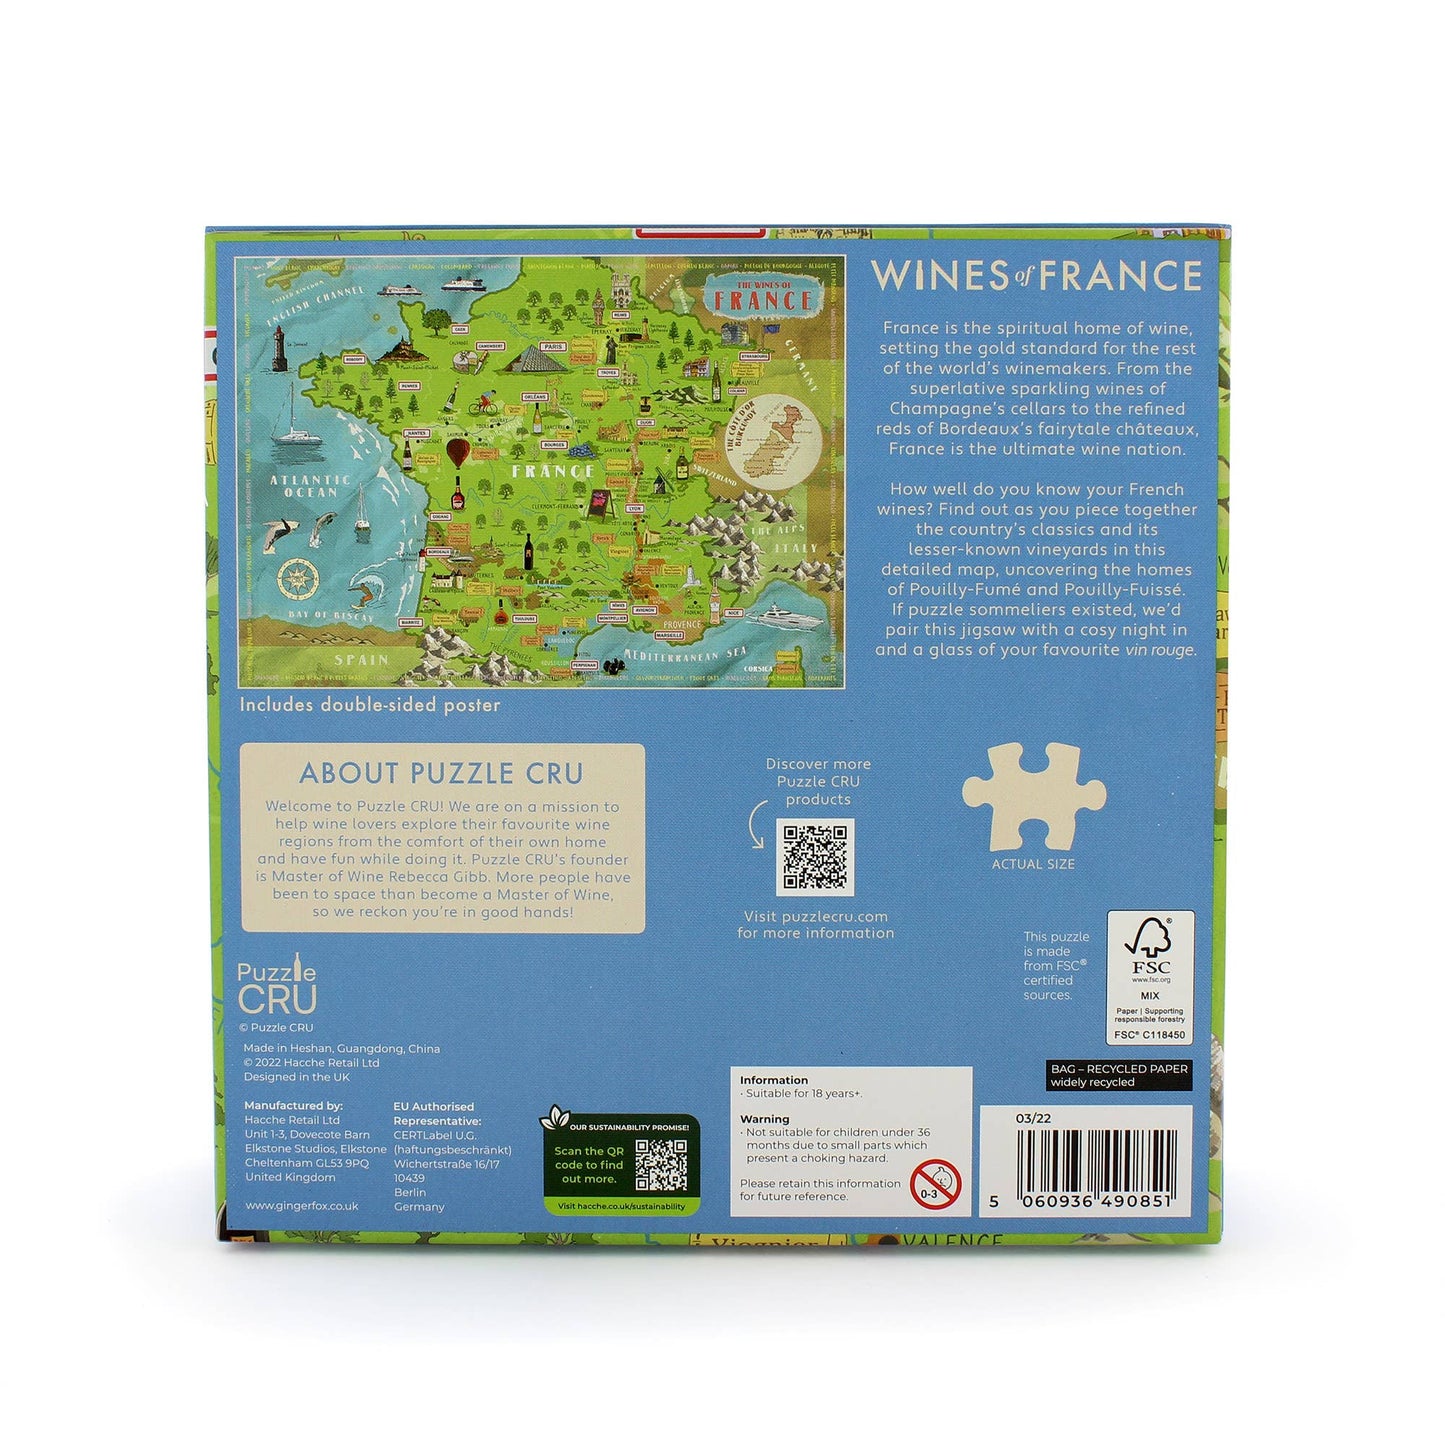 Wines of France - Puzzle Cru